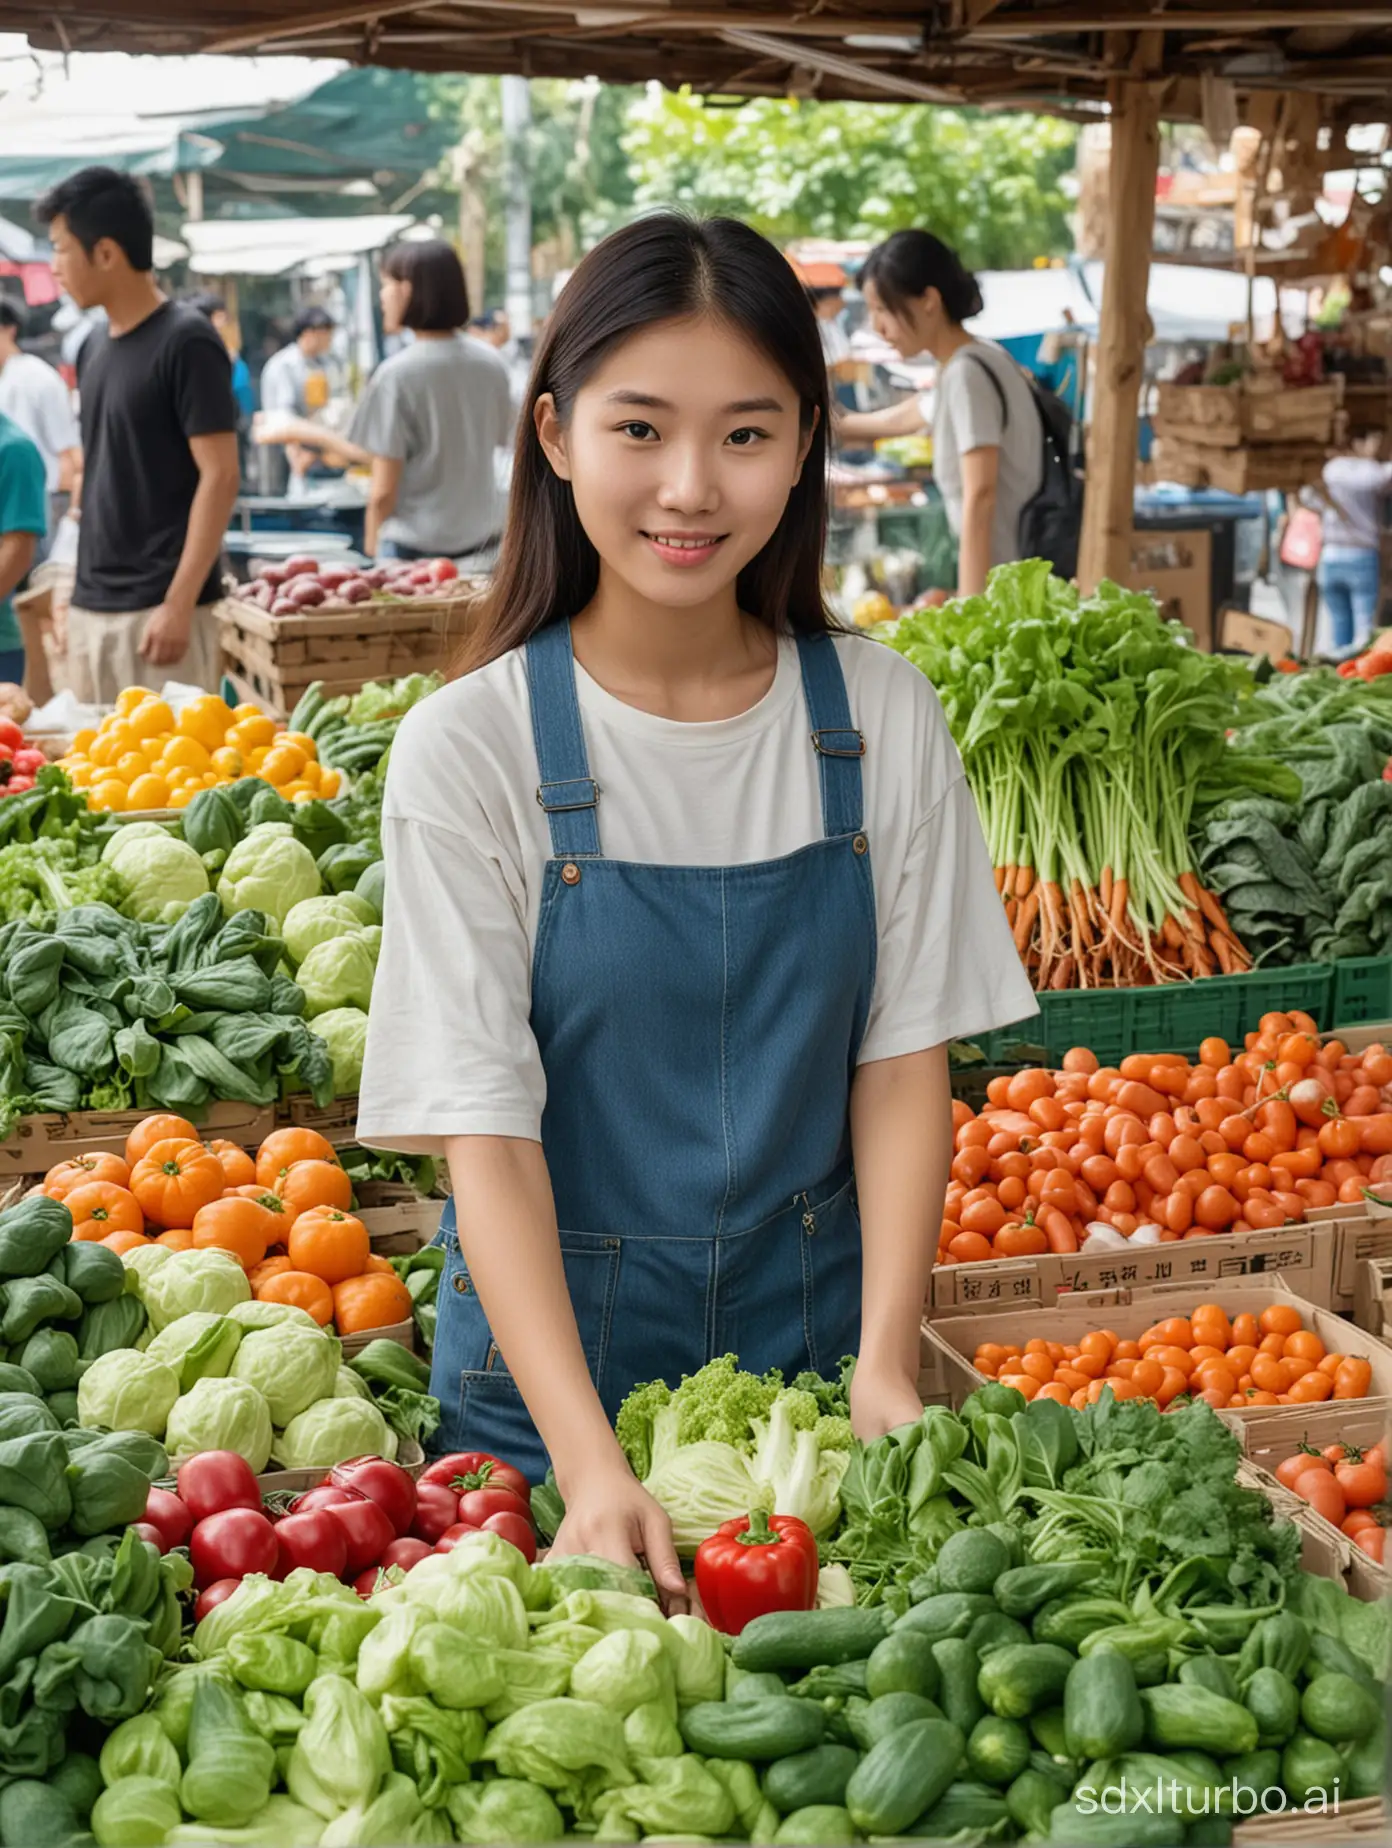 18-year-old Asian lady chooses vegetables in front of a vegetable stall